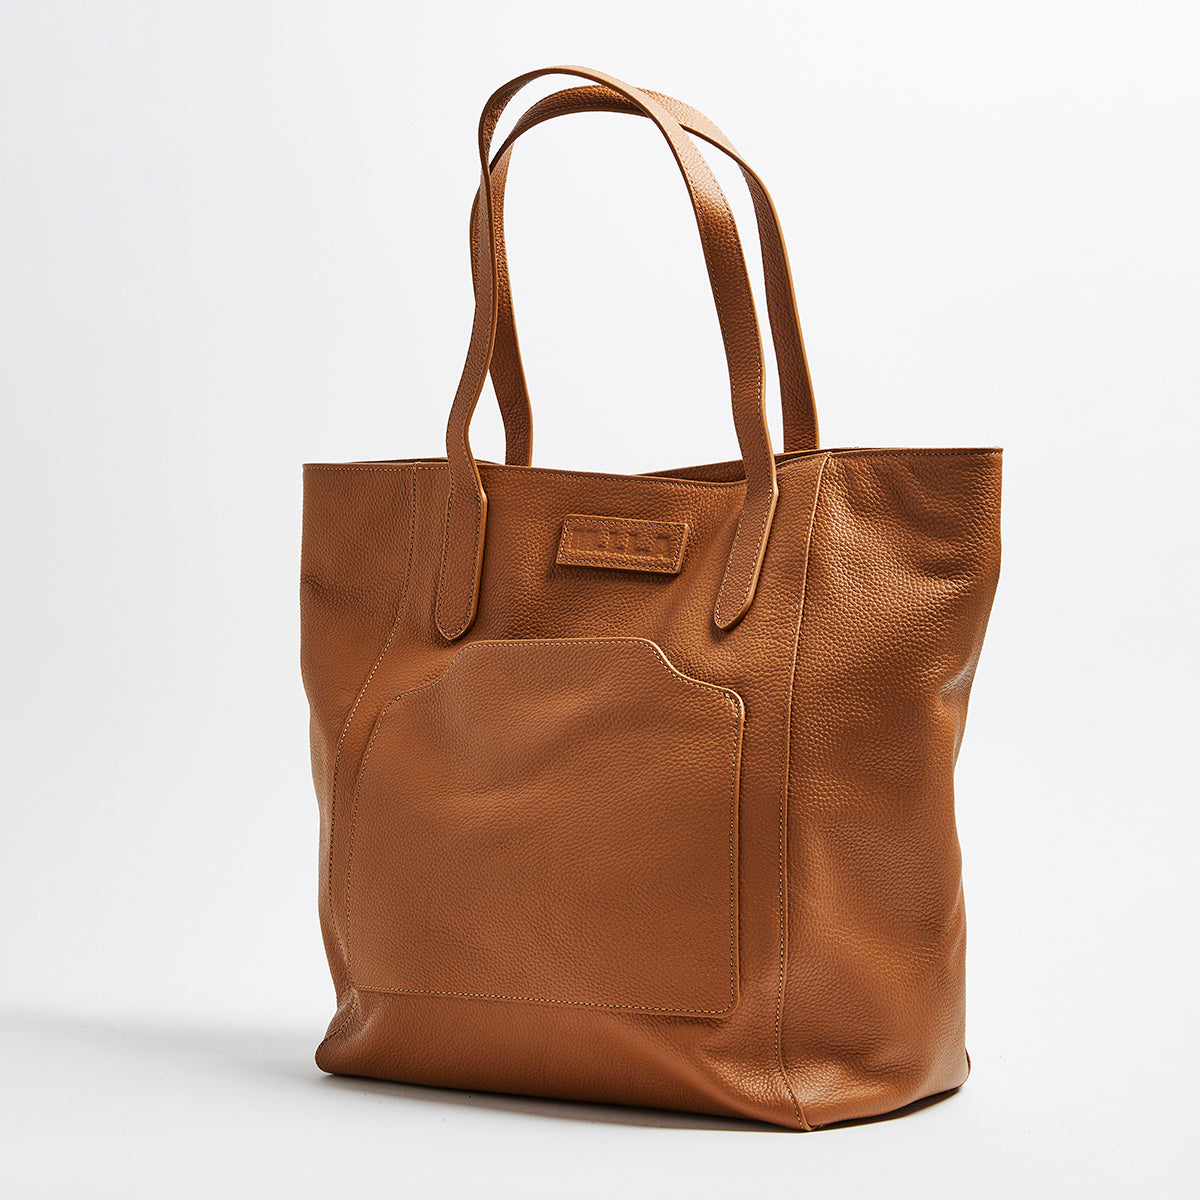 Jenna Bag | Leather | Light Brown – M.I.L.A. made in Los Angeles